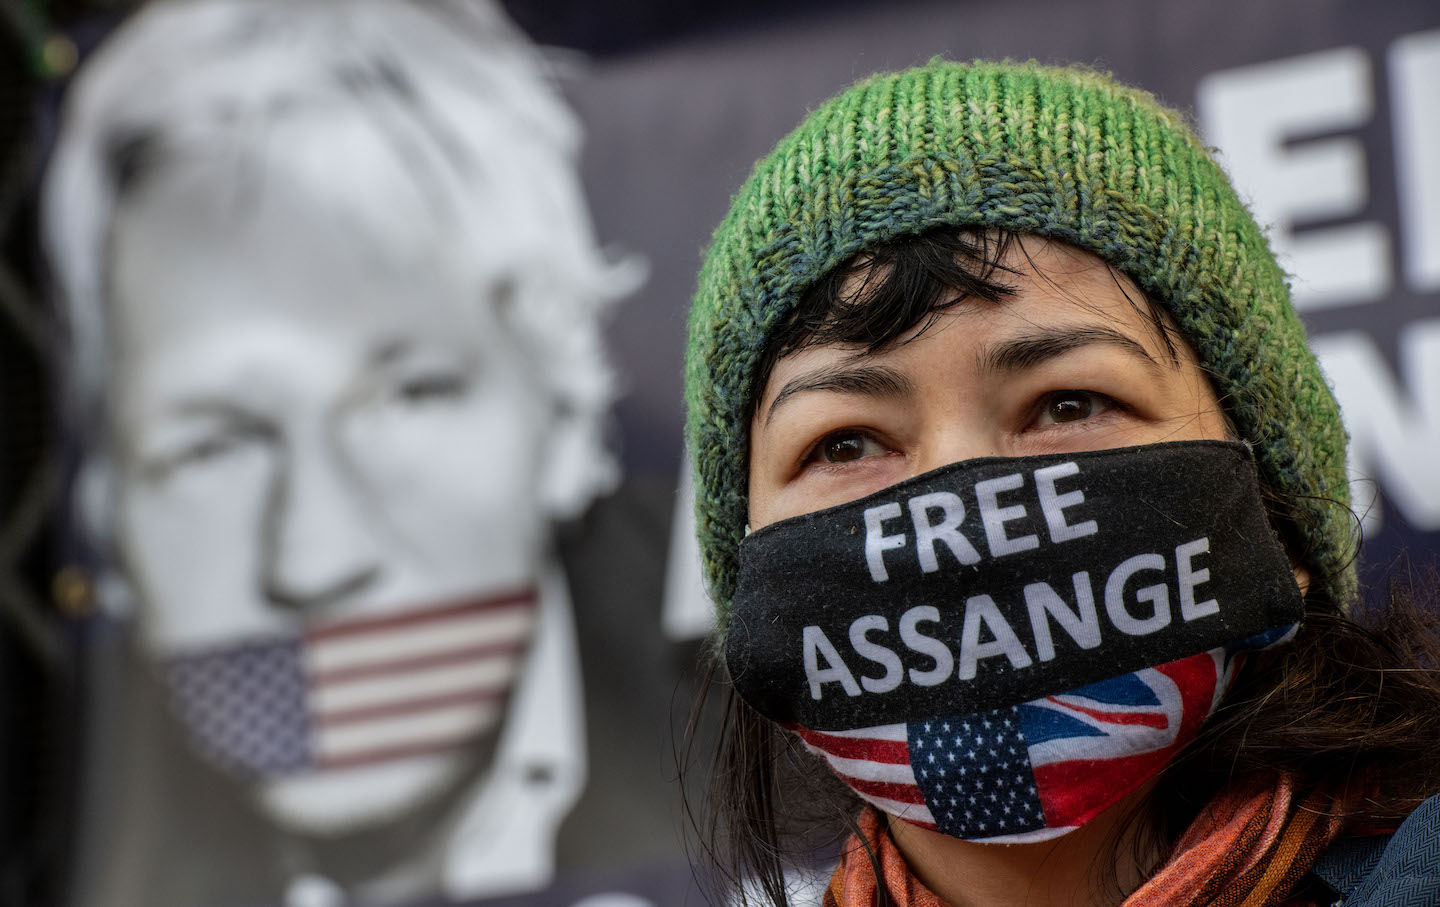 The Prosecution of Julian Assange Absolutely Threatens Freedom of the Press